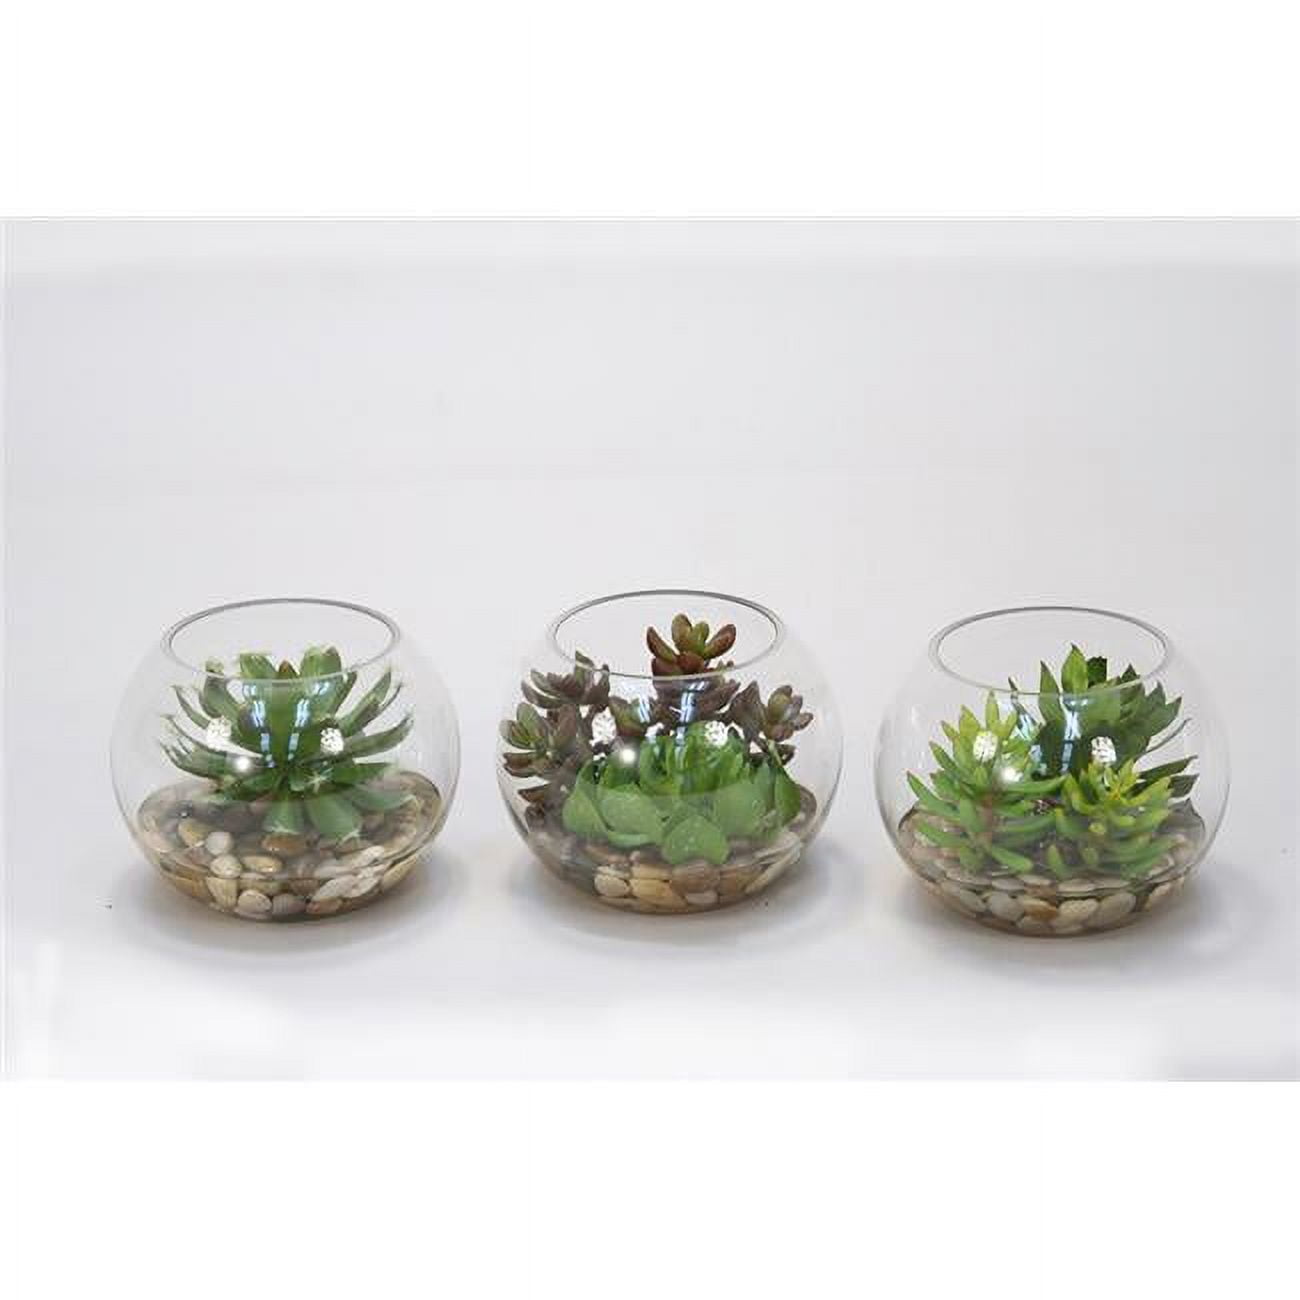 Picture of Disttive Designs 17137 Unisex Succulents in Small Round Glass - Green